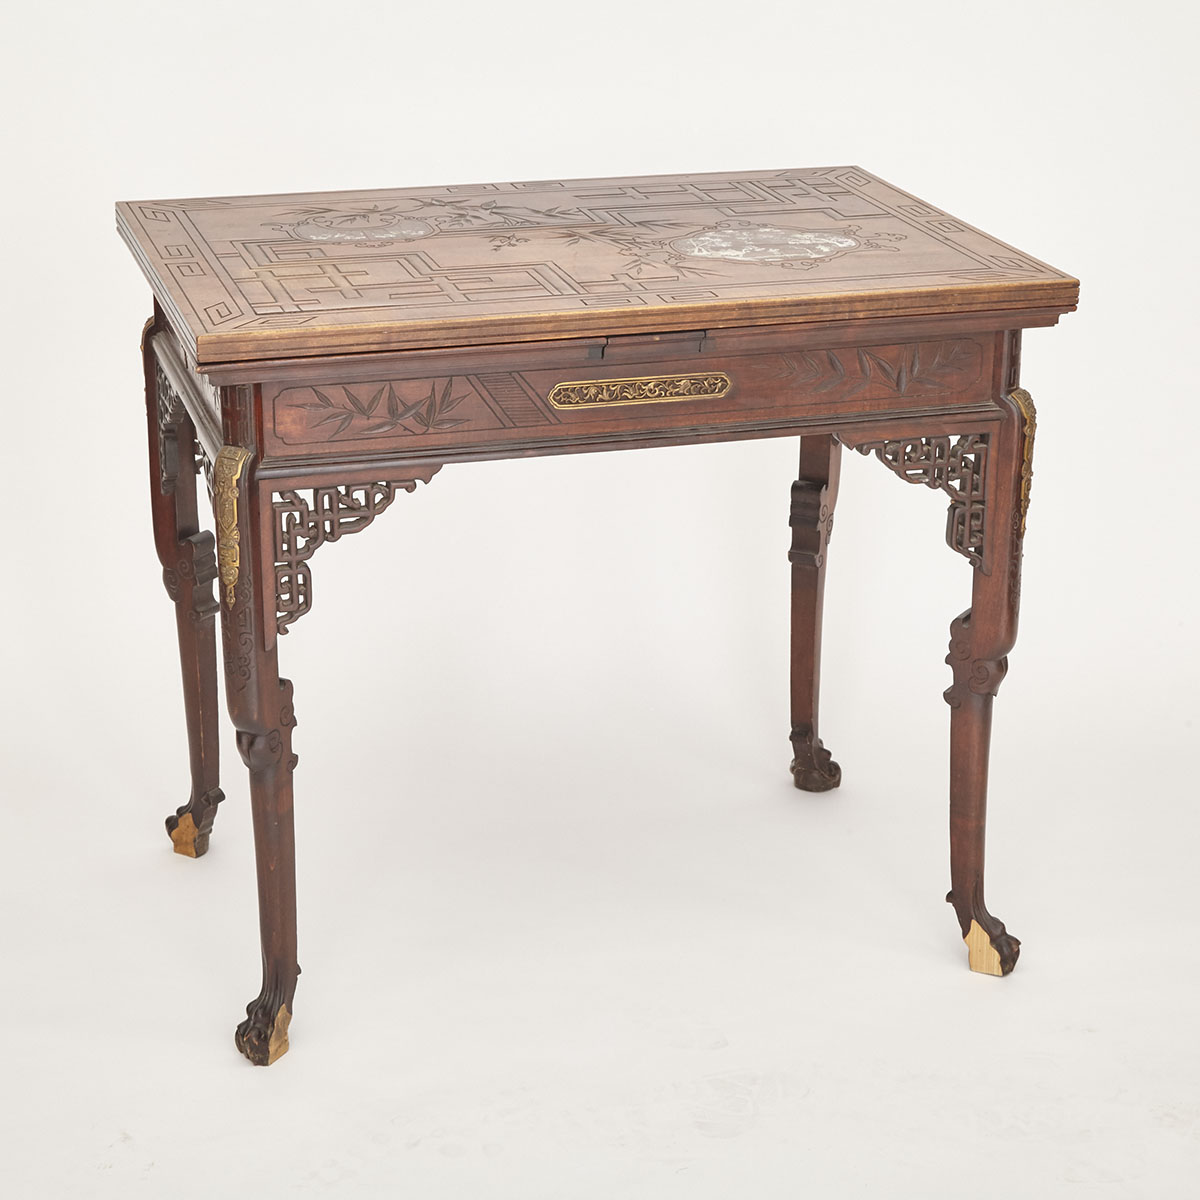 French Japonism Ormolu Mounted and Abalone inlaid Beech Extension Games Table, Gabriel Viardot  (1830-1906), c.1880